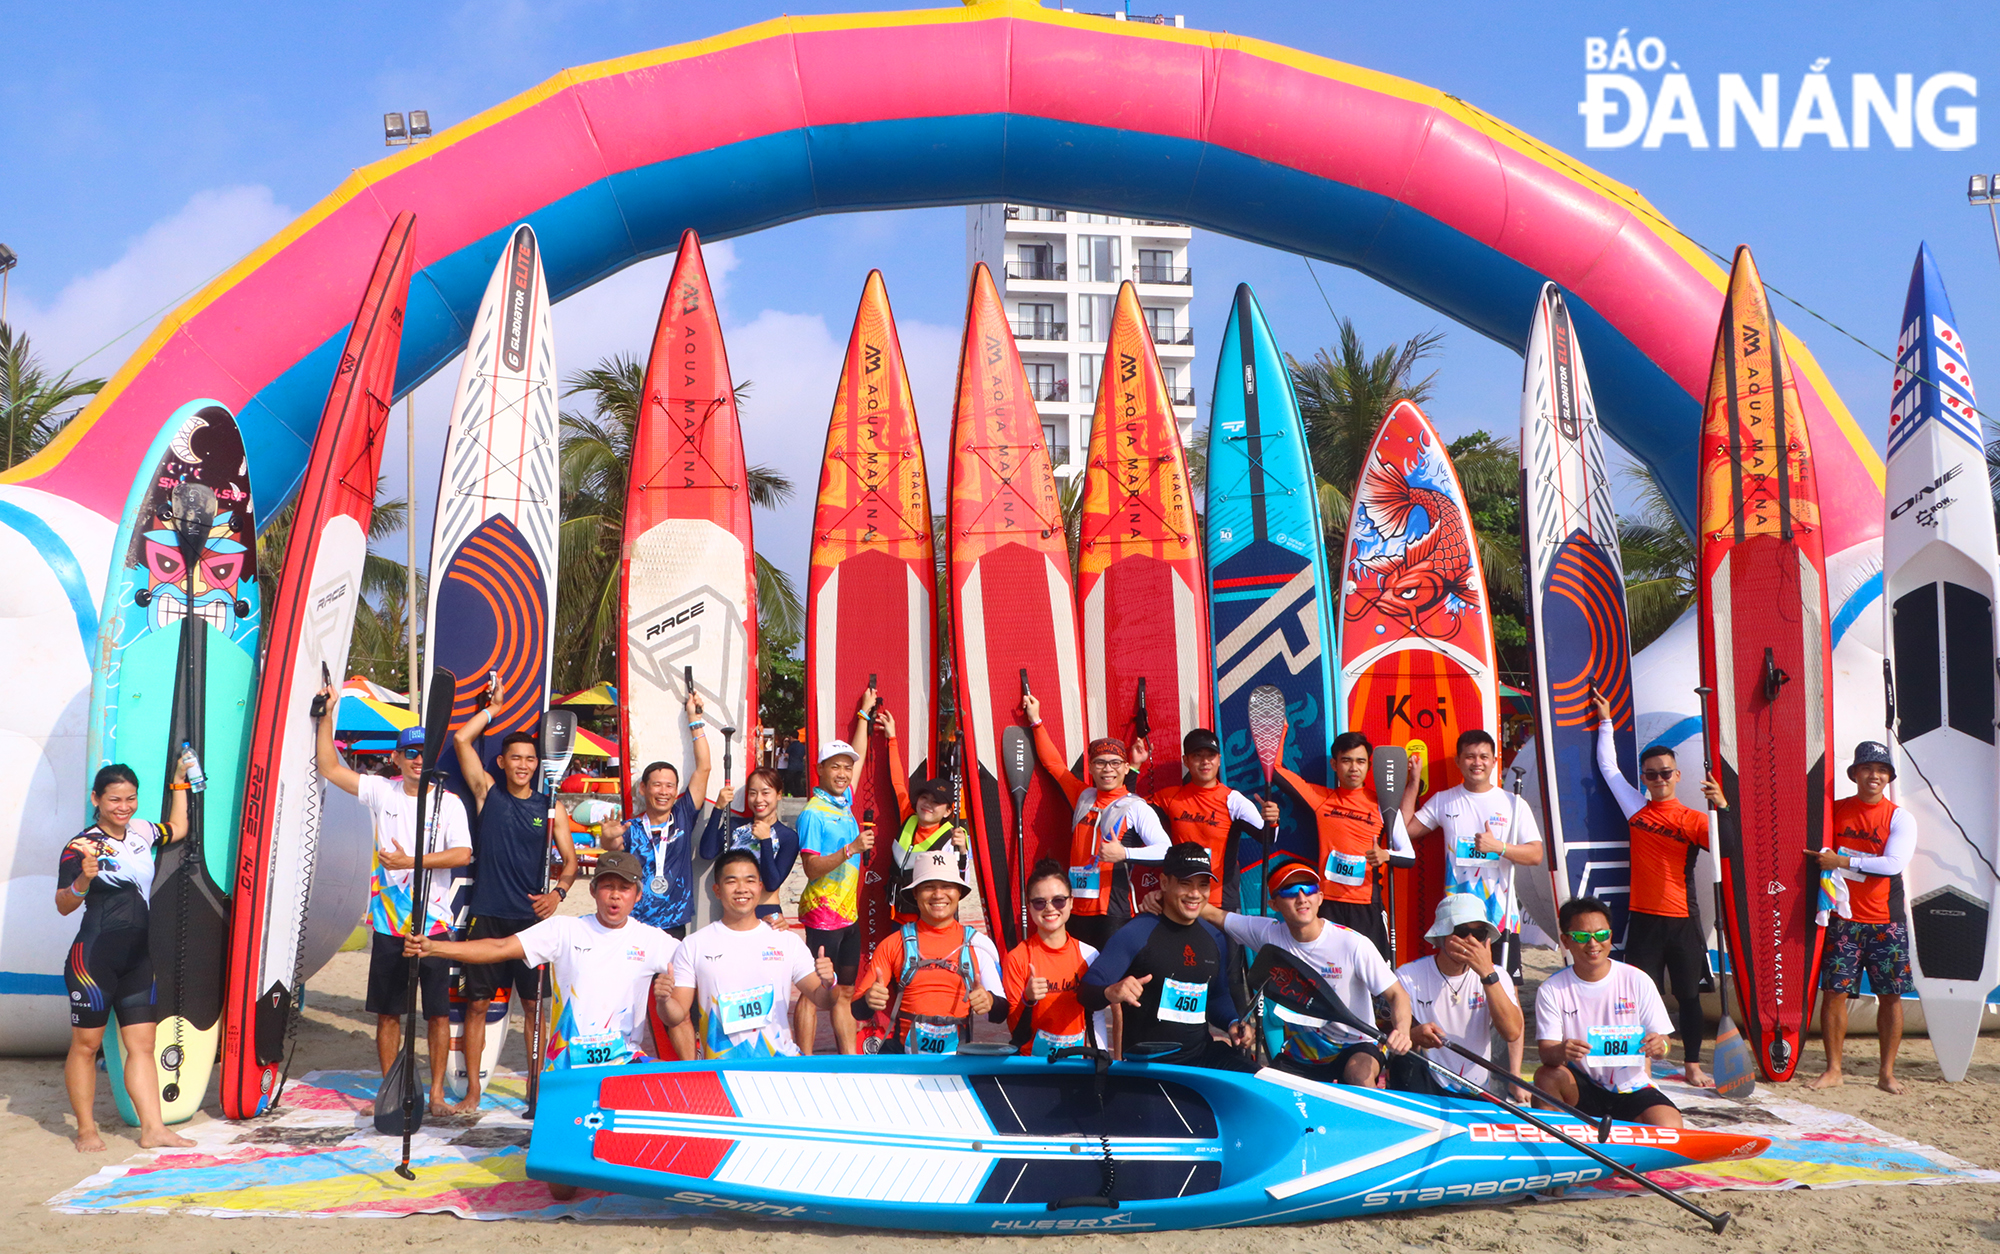    Athletes take souvenir photos before the start of the SUP competition.